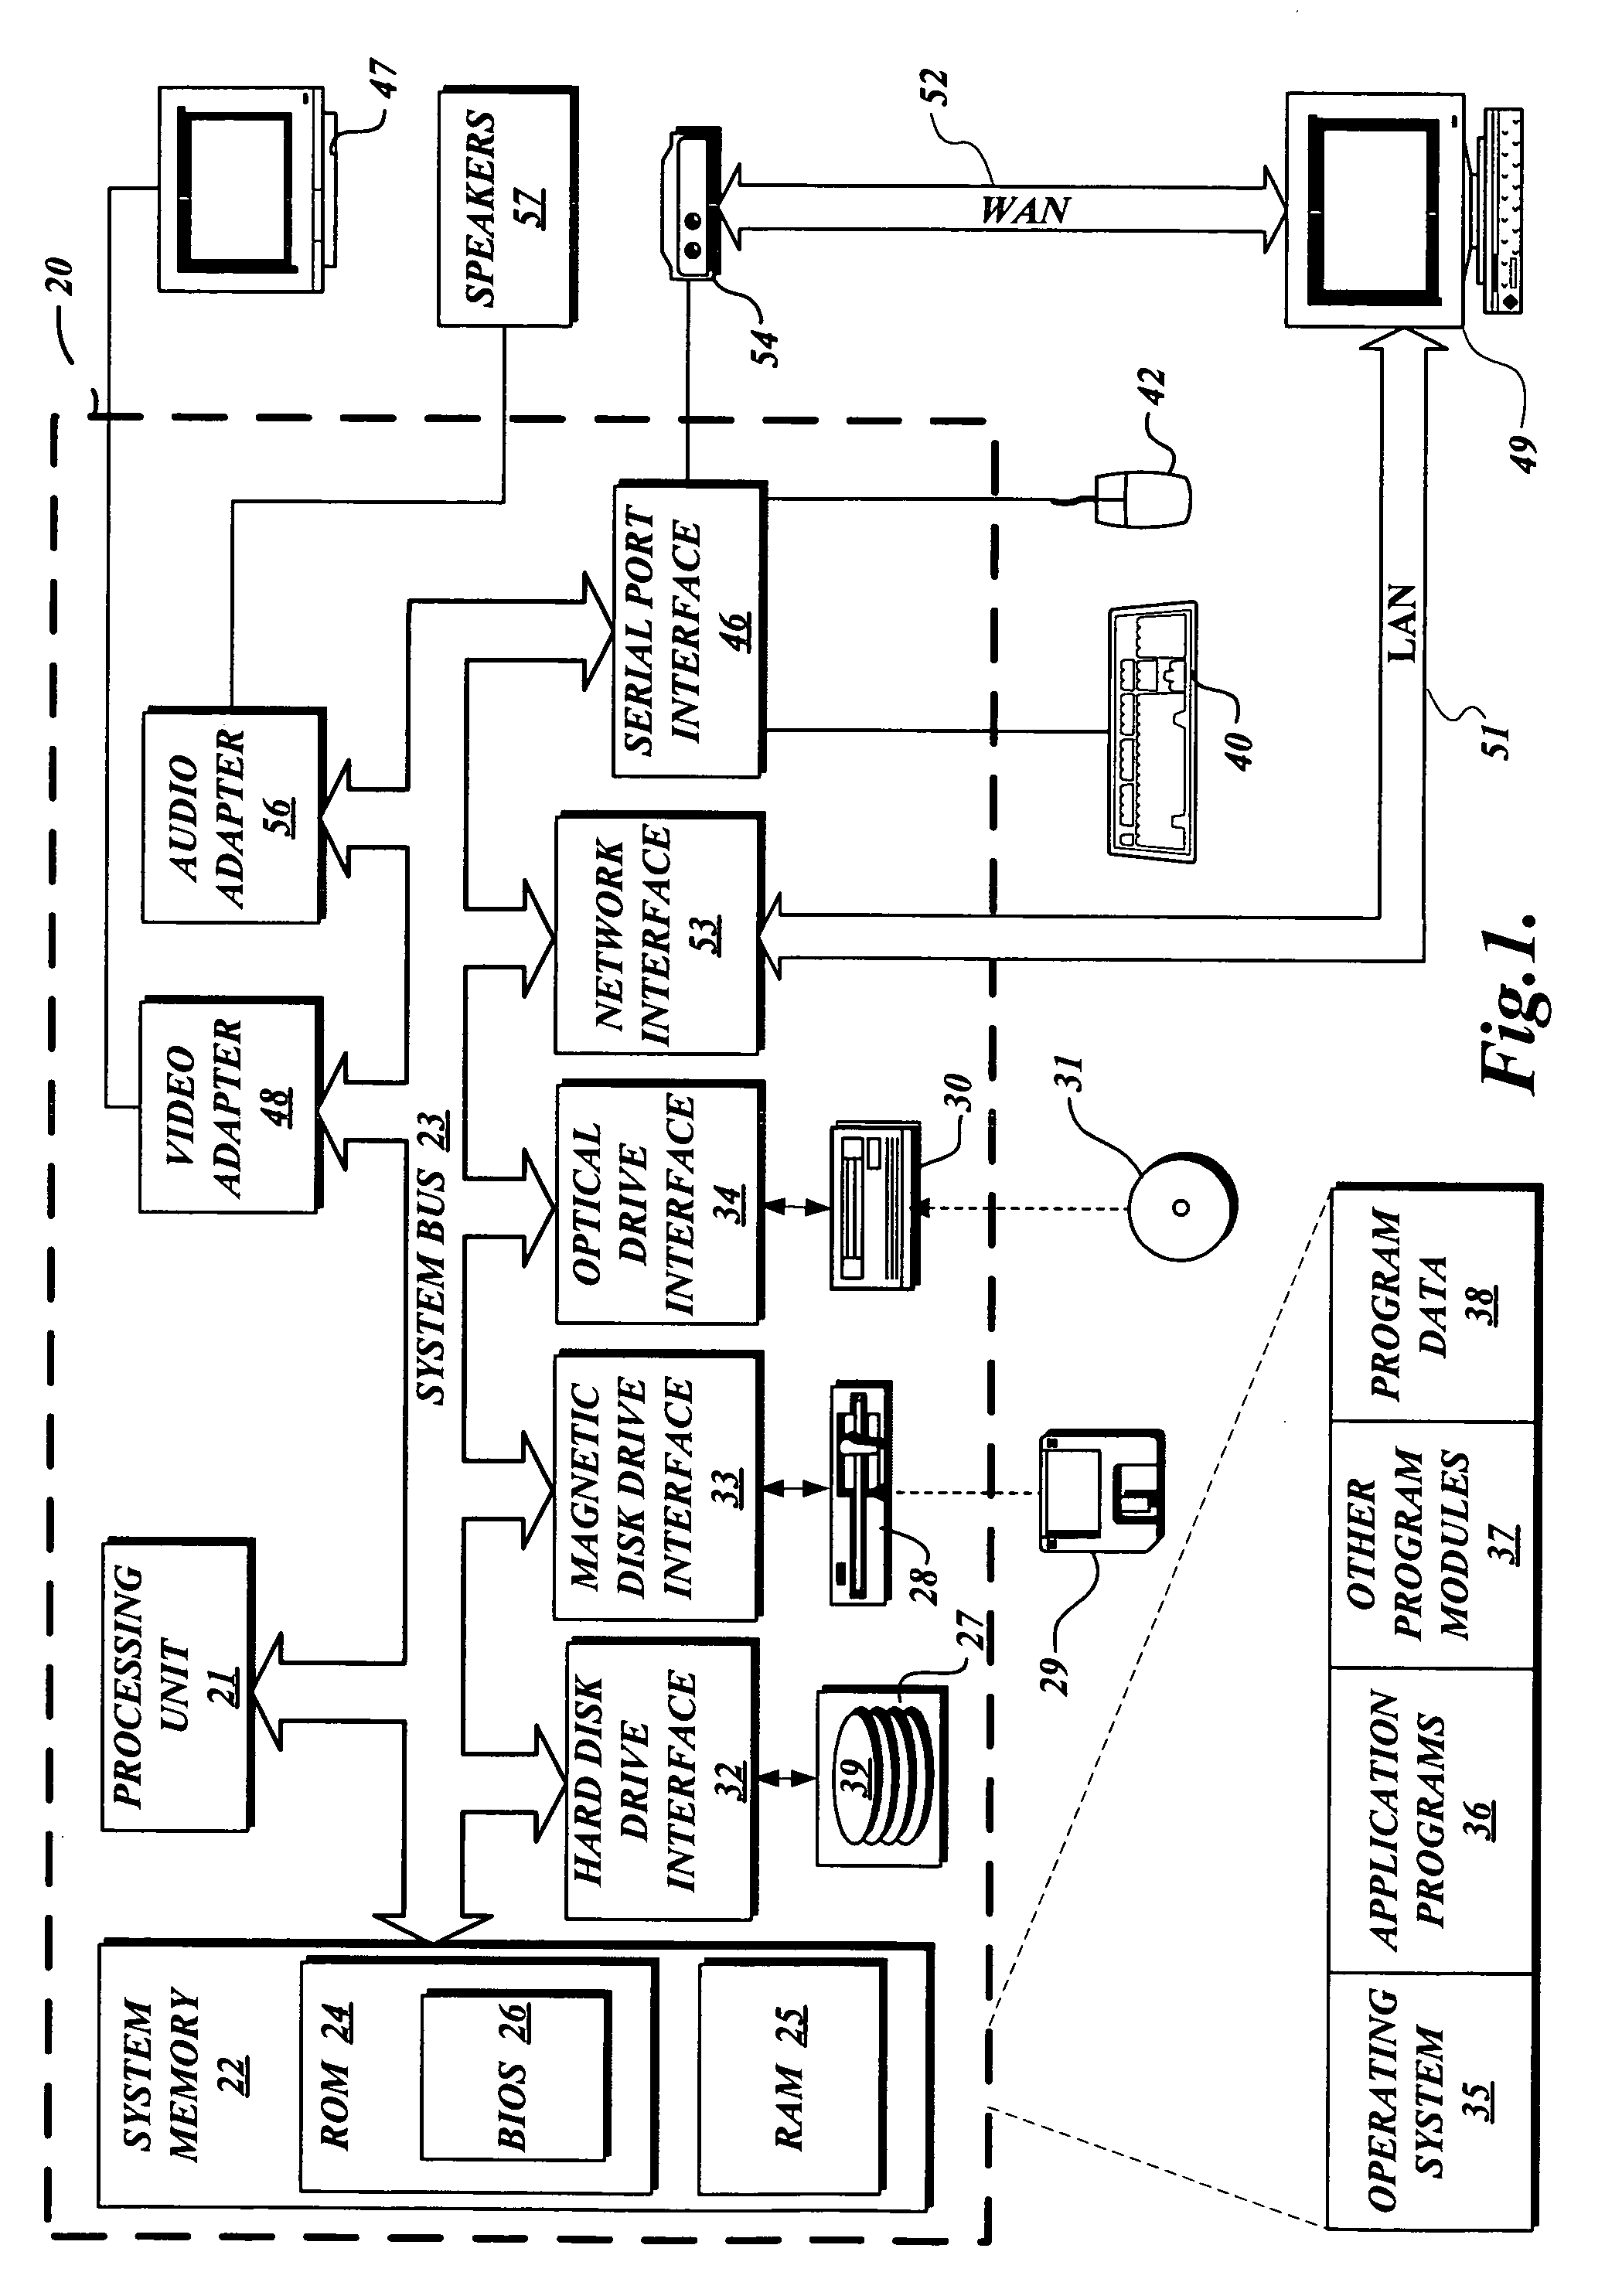 System and method for sharing items in a computer system